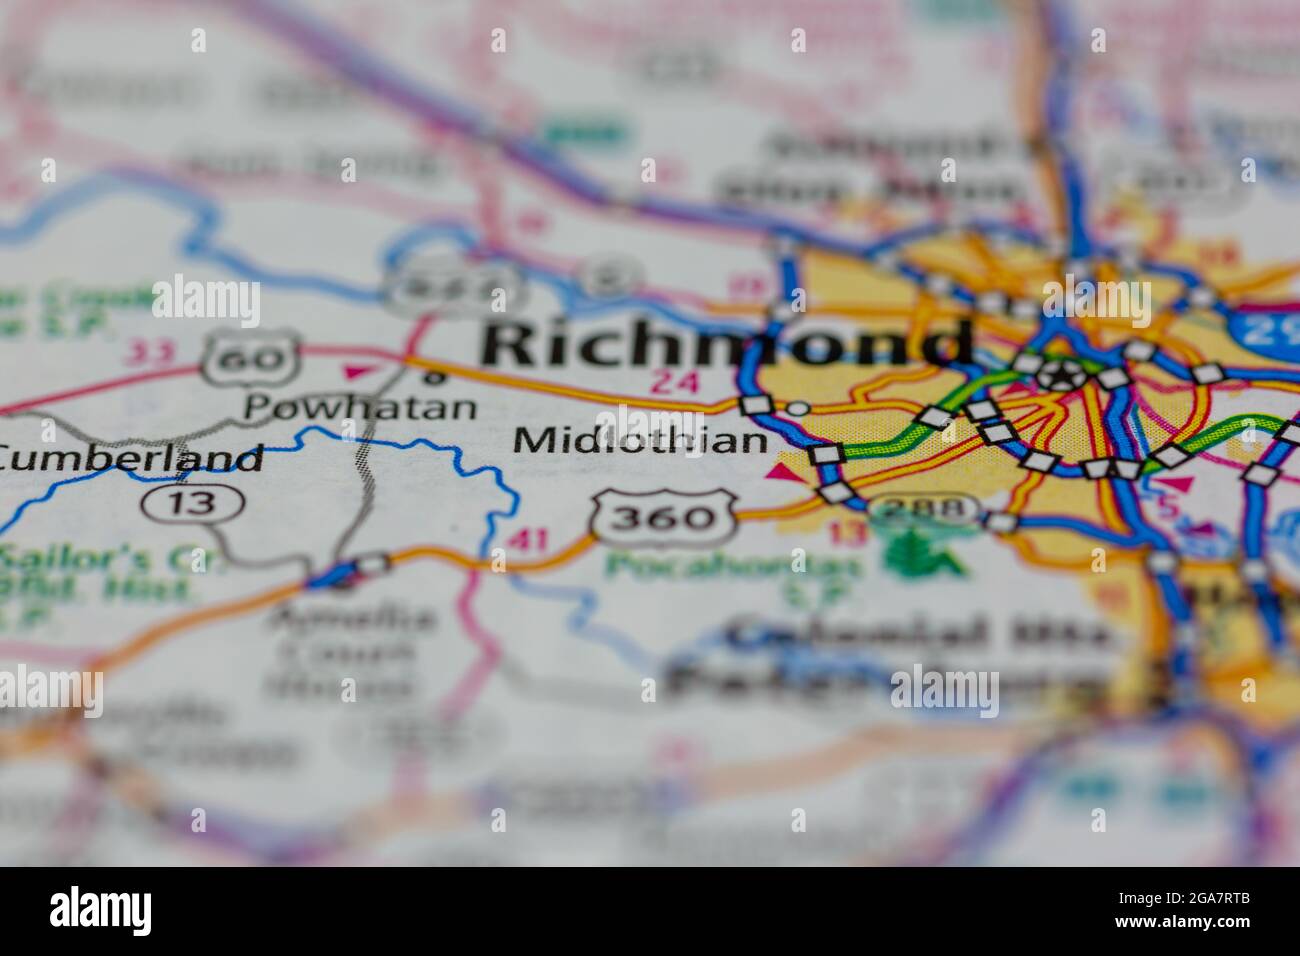 Midlothian Virginia shown on a road map or Geography map Stock Photo